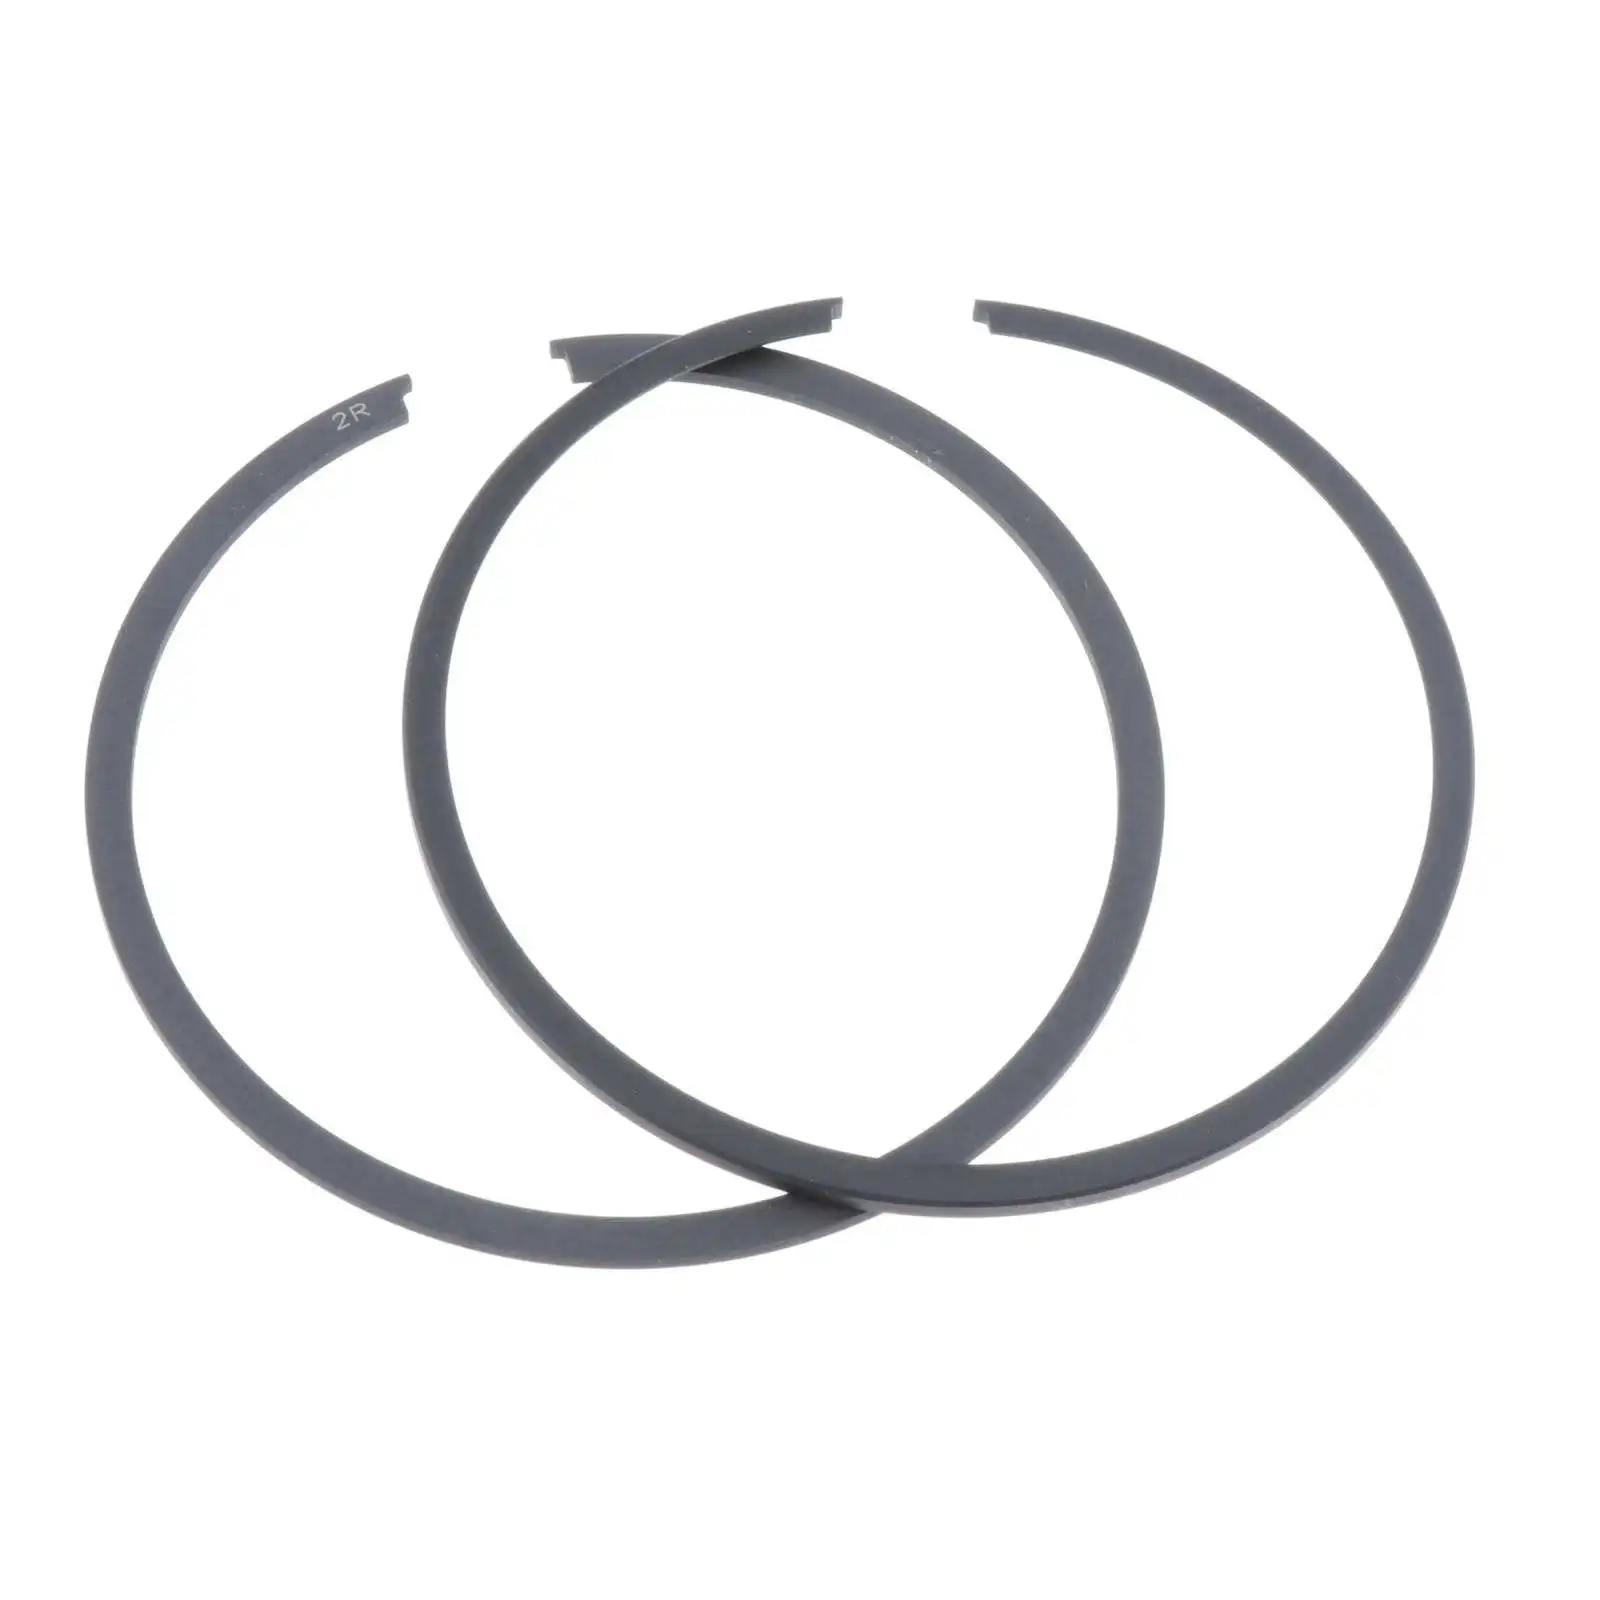 Set of 2 Vehicle Engines Piston Rings 396377 0385807 for JOHNSON EVINRUDE